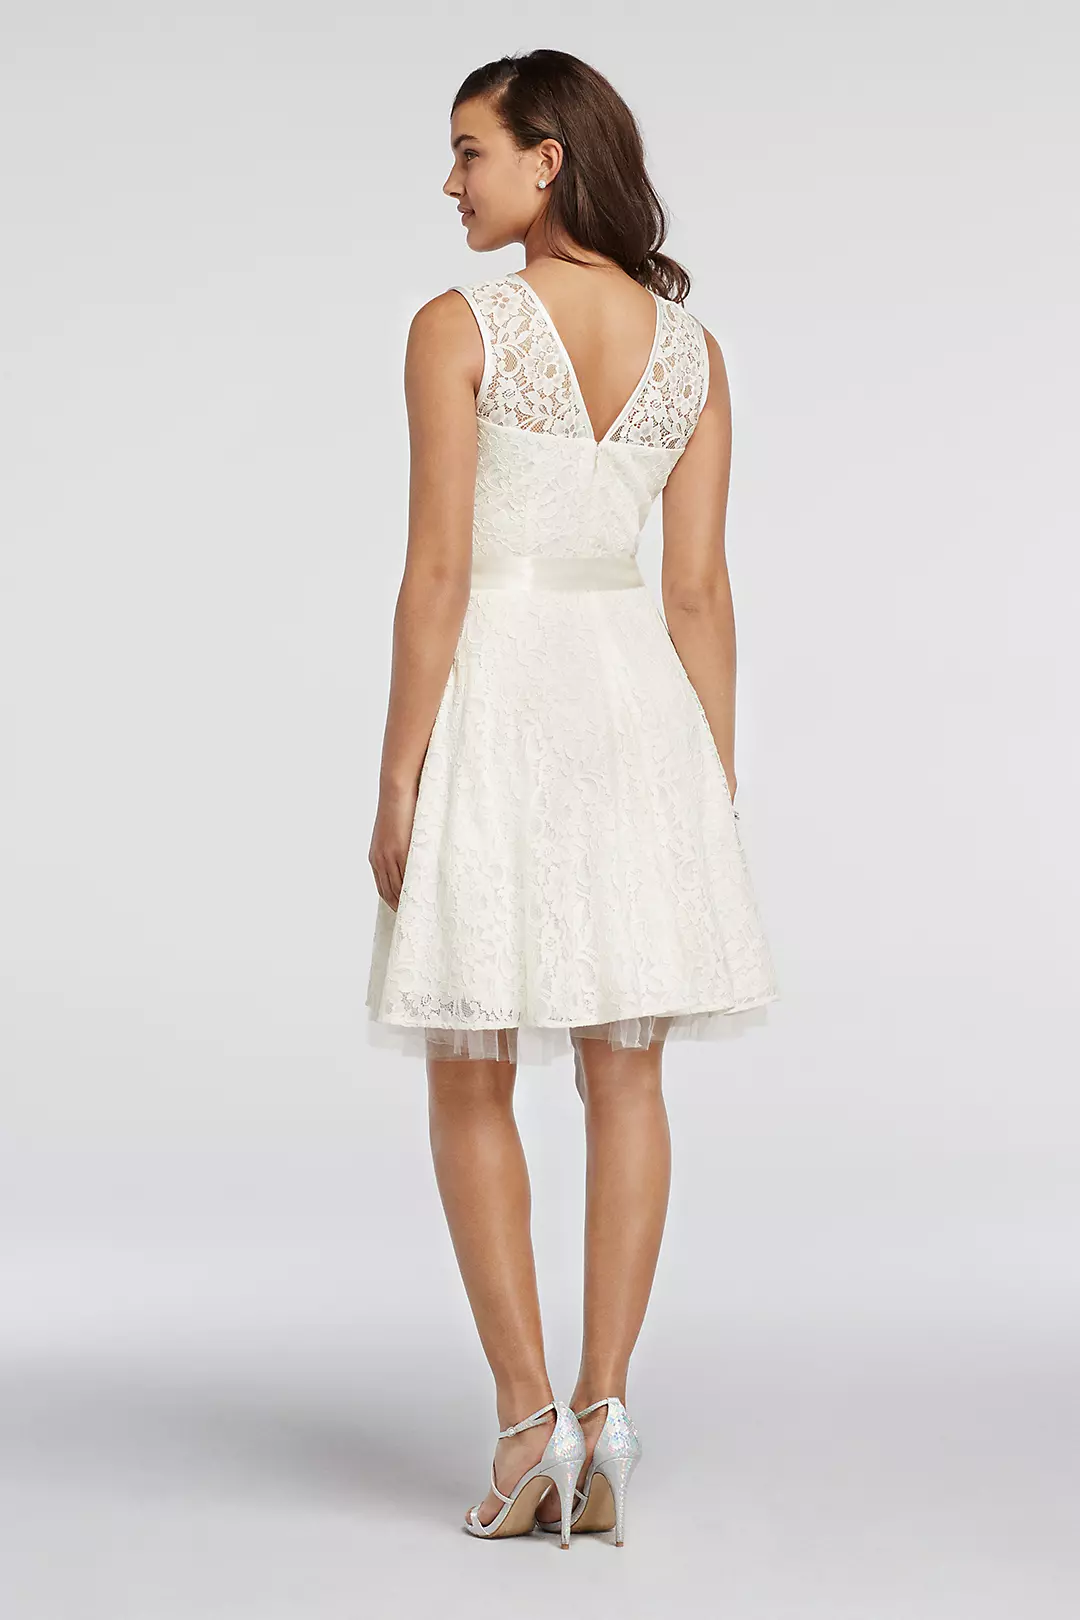 Lace A-Line Sleeveless Dress with Sash Detail Image 2